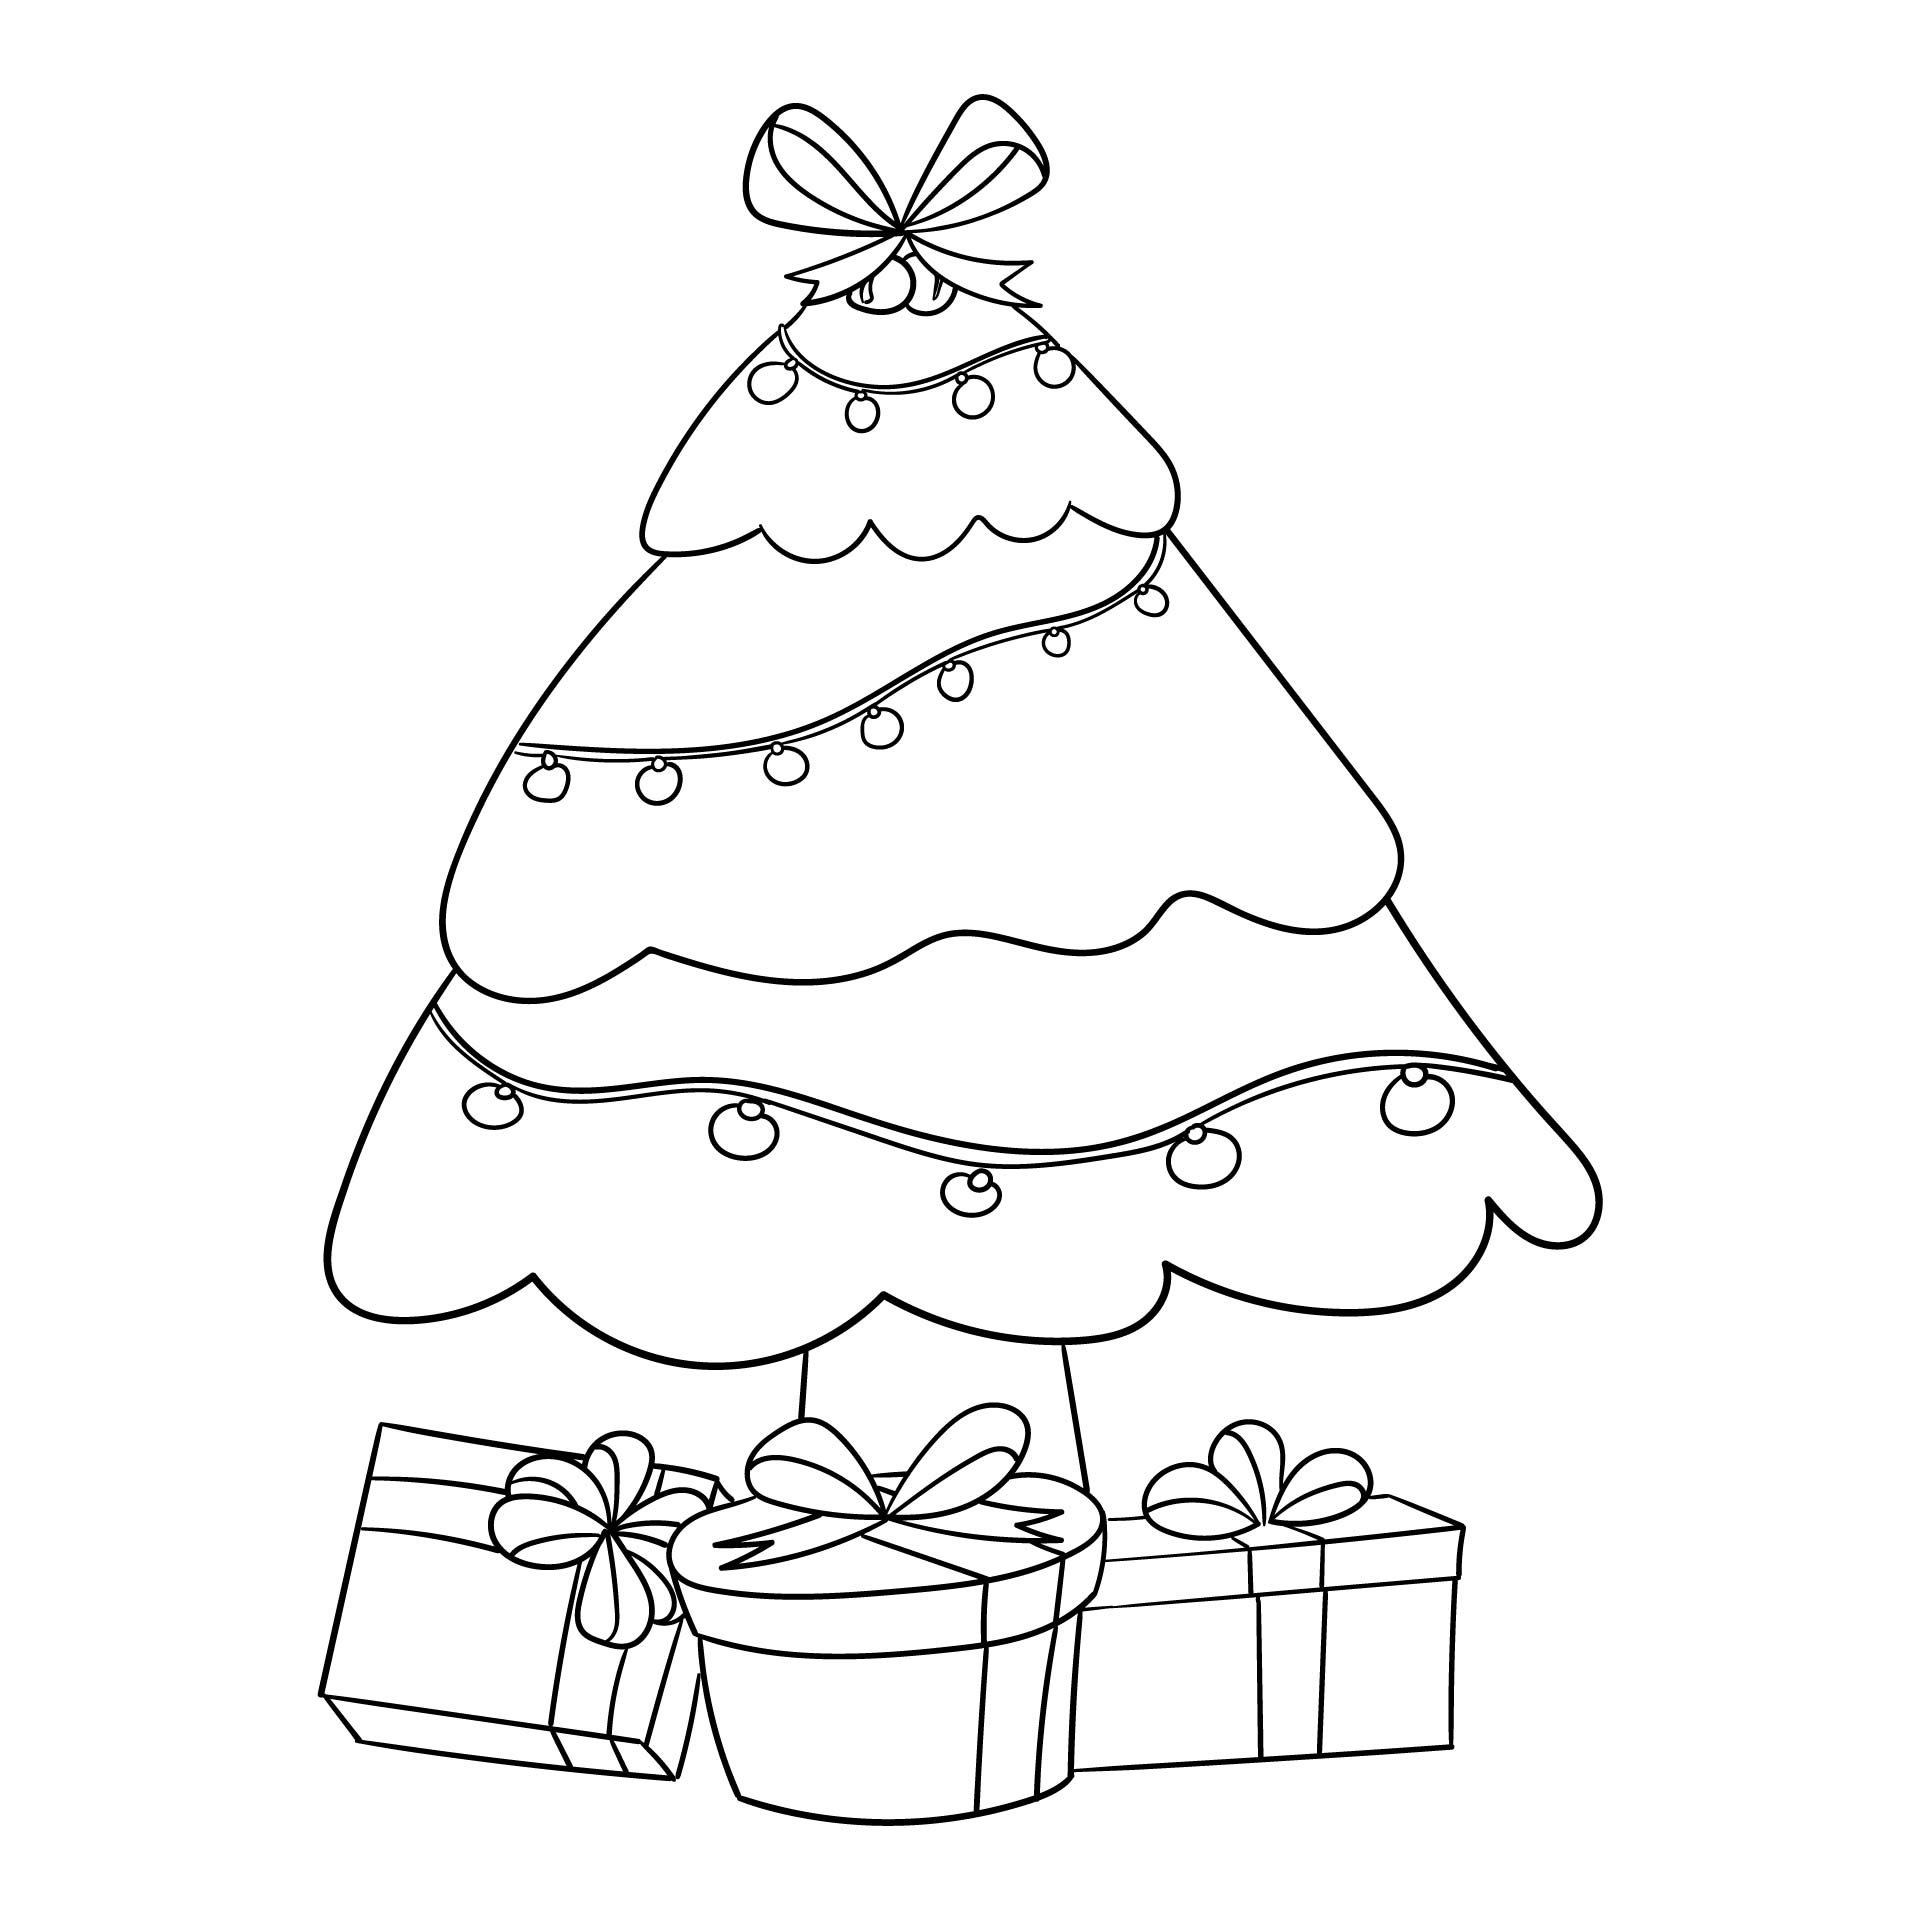 Printable Christmas Tree With Gifts Black And White